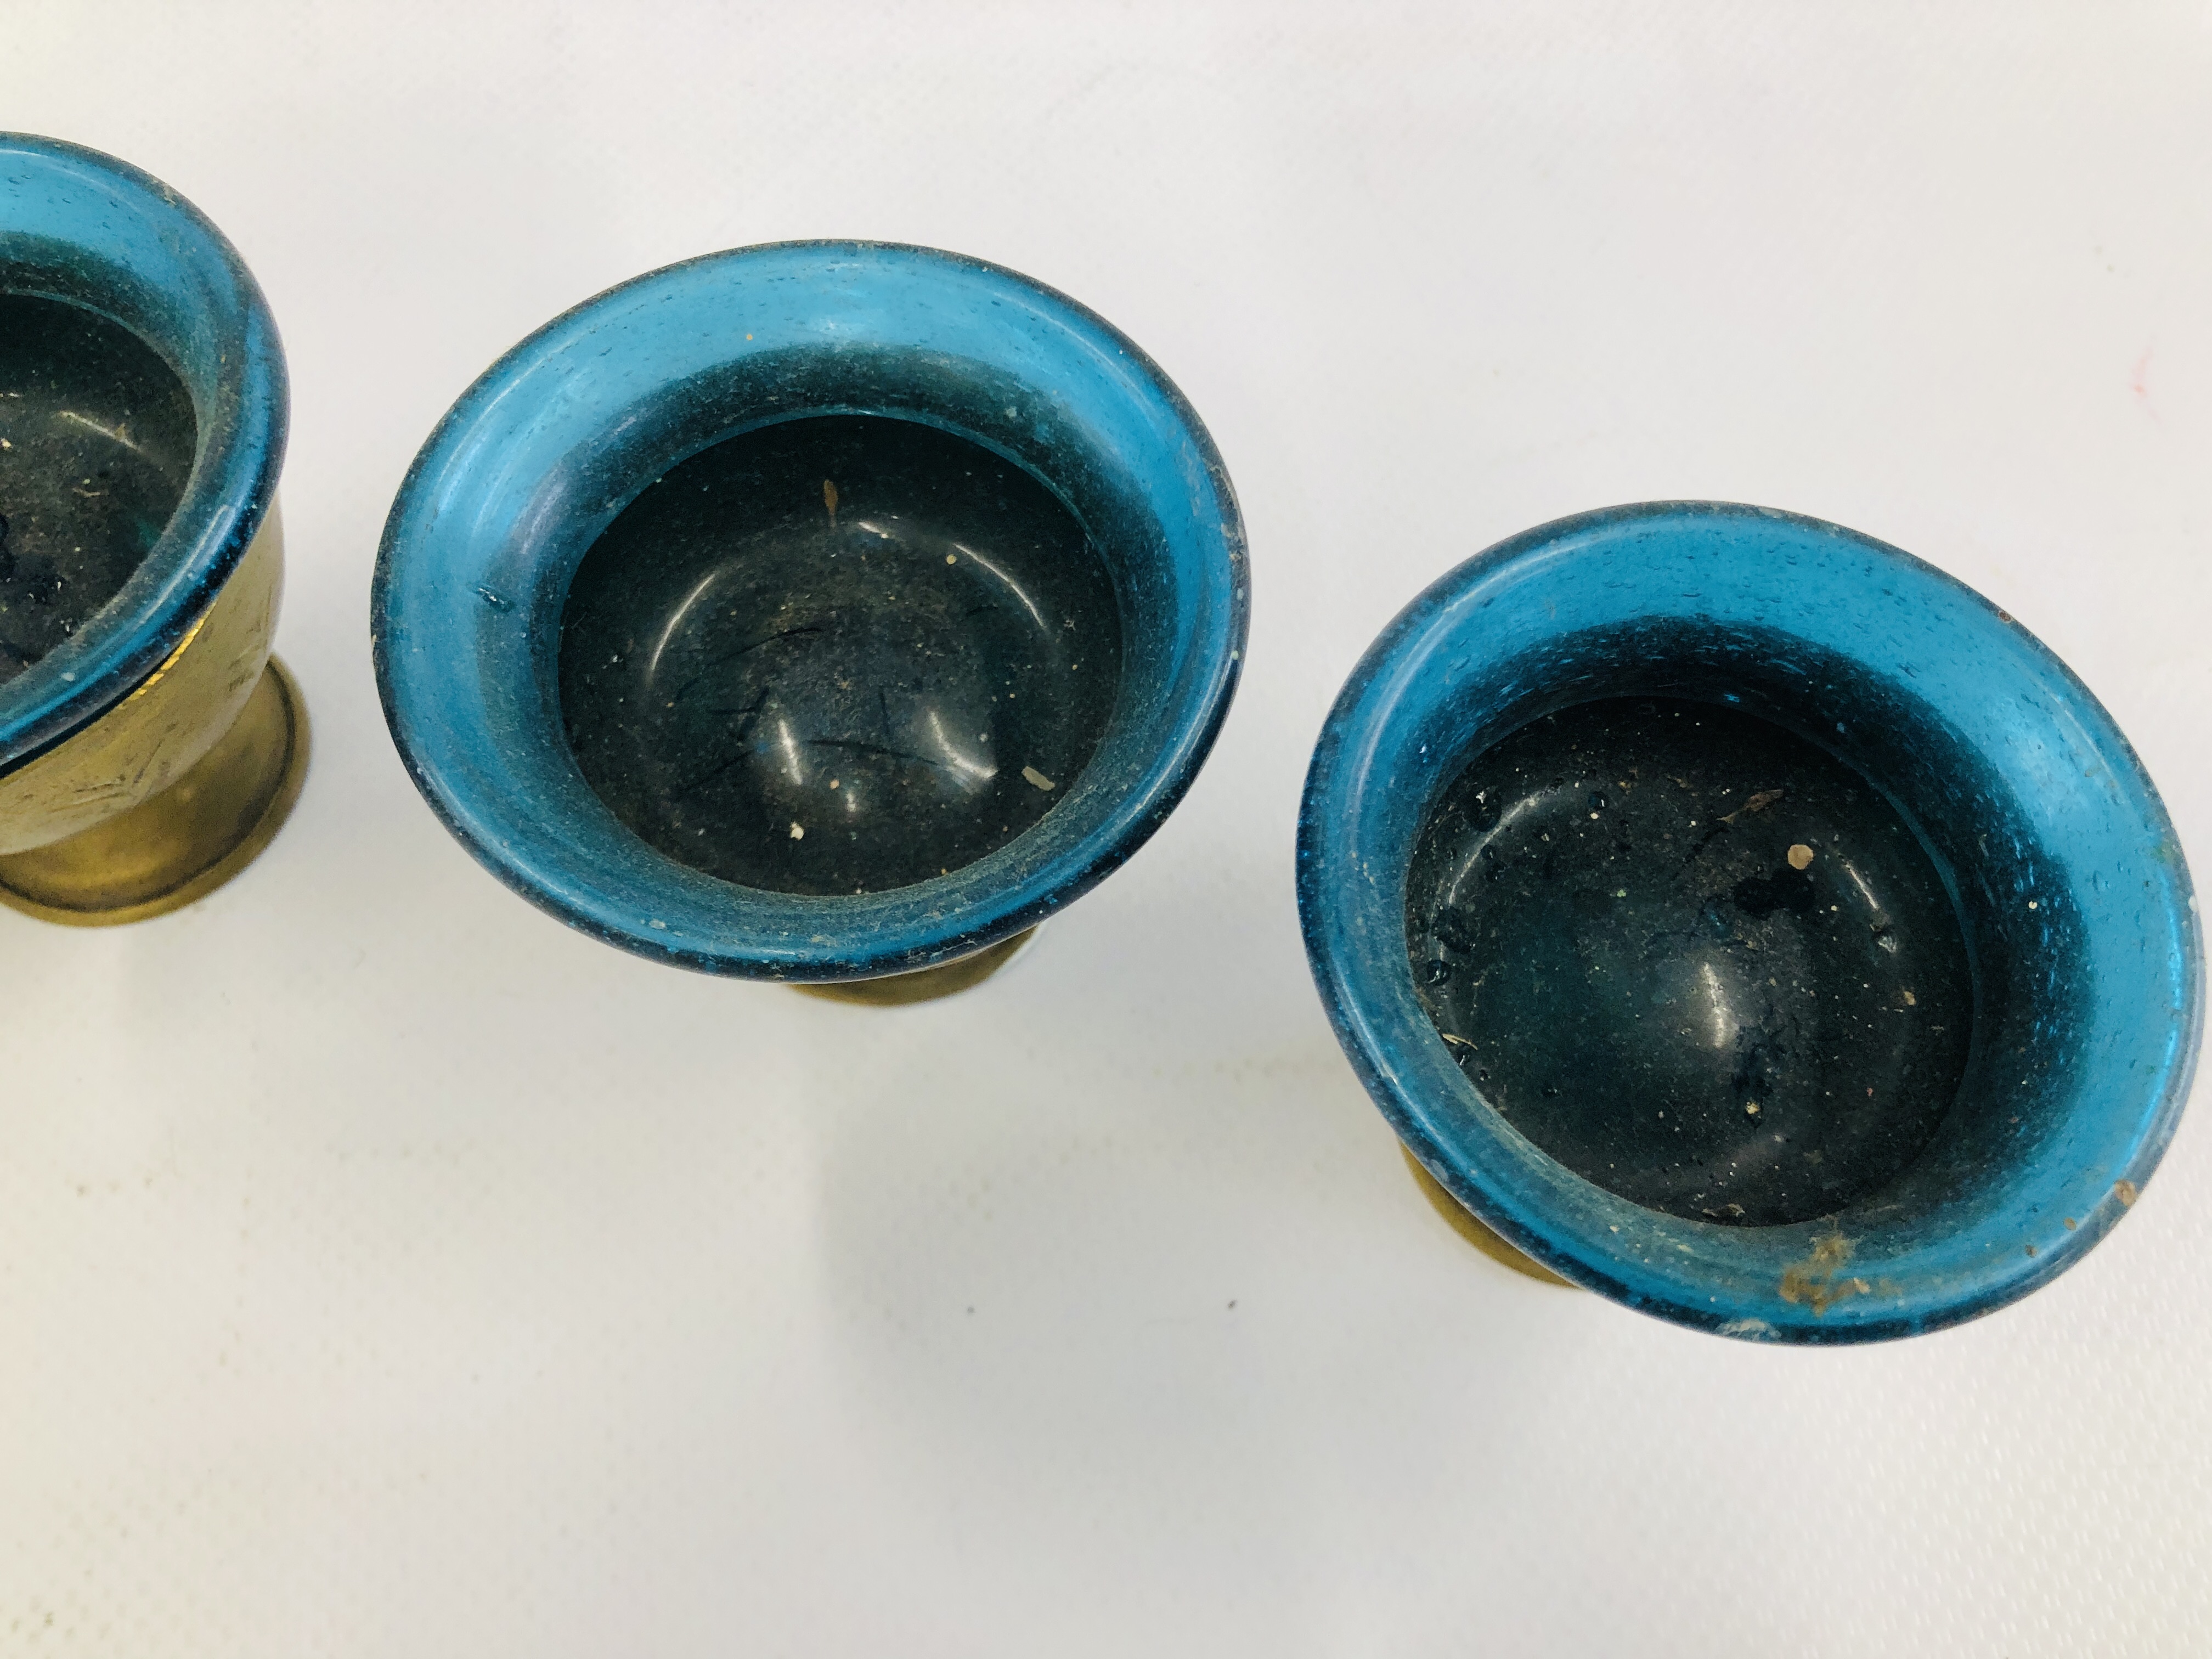 A SET OF SIX MIDDLE EASTERN BRASS GOBLET VESSELS WITH BLUE GLASS LINERS. - Image 5 of 11